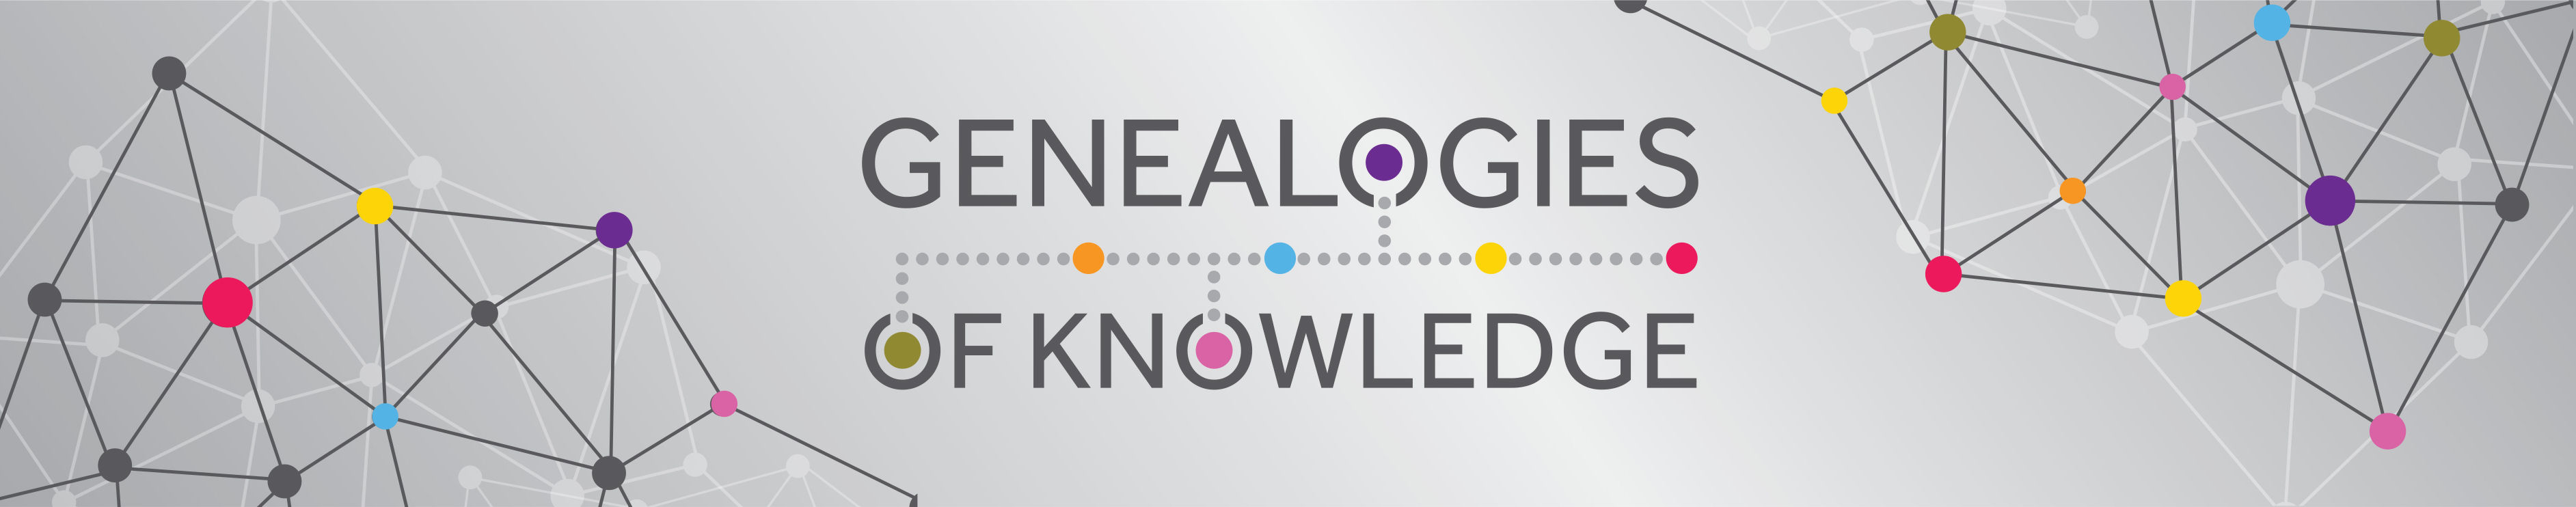 Conference Programme: Genealogies of Knowledge I  2017